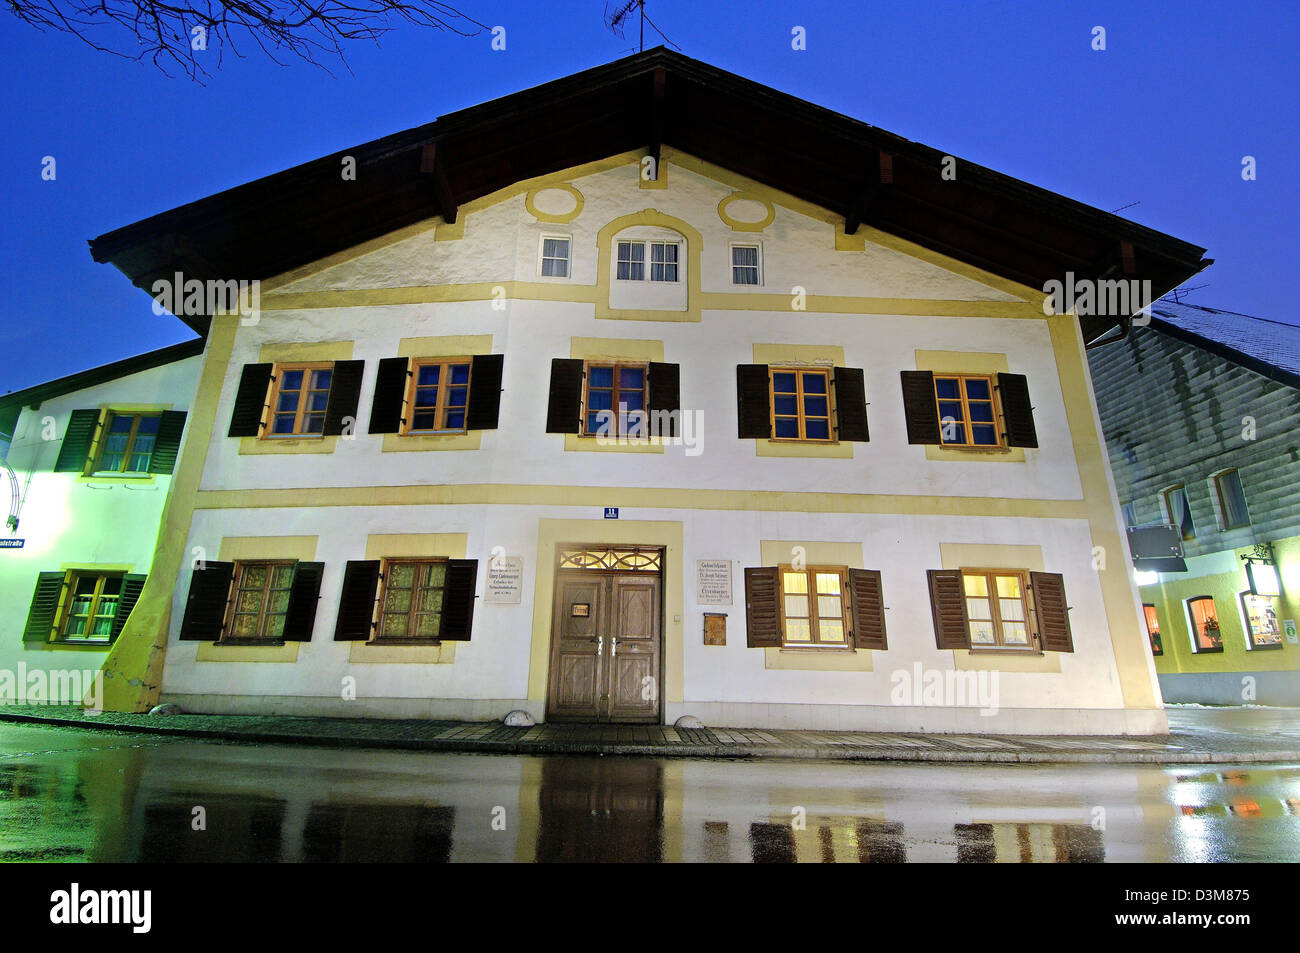 (dpa) - The picture shows the birthplace of Pope Benedict XVI. former cardinal dean Joseph Ratzinger at night in Bavaria's Marktl am Inn, Germany, 23 December 2005. Ratzinger was born in this house on 19 April 1927. Photo Armin Weigel Stock Photo